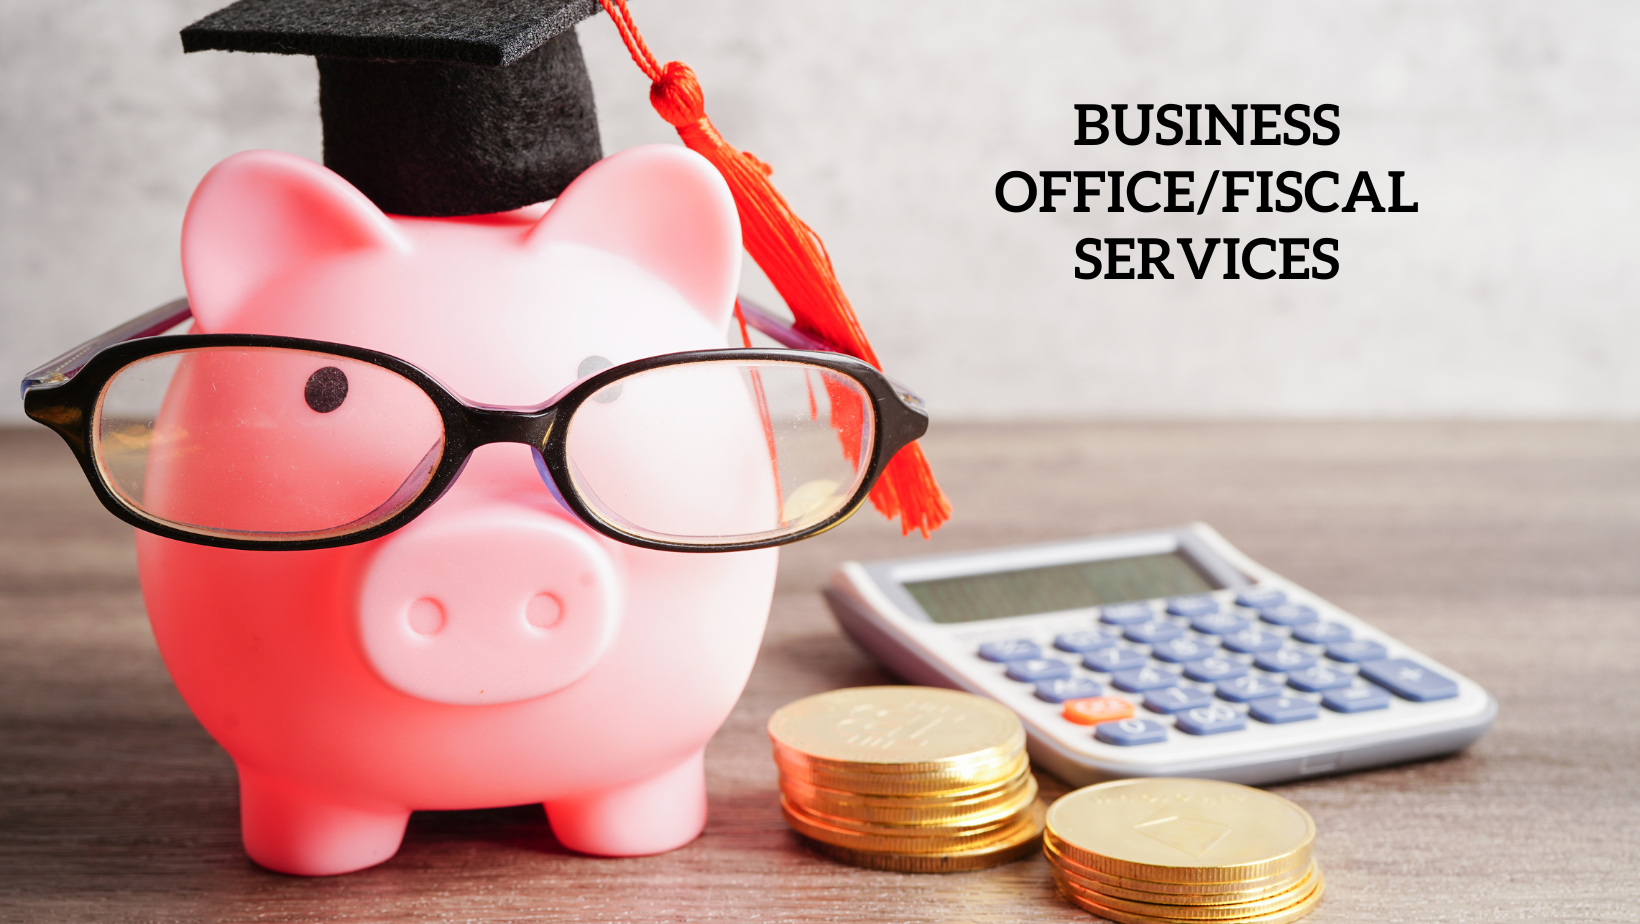 Business Office/Fiscal Services banner, piggybank with glasses and graduation cap, gold coins and calculator